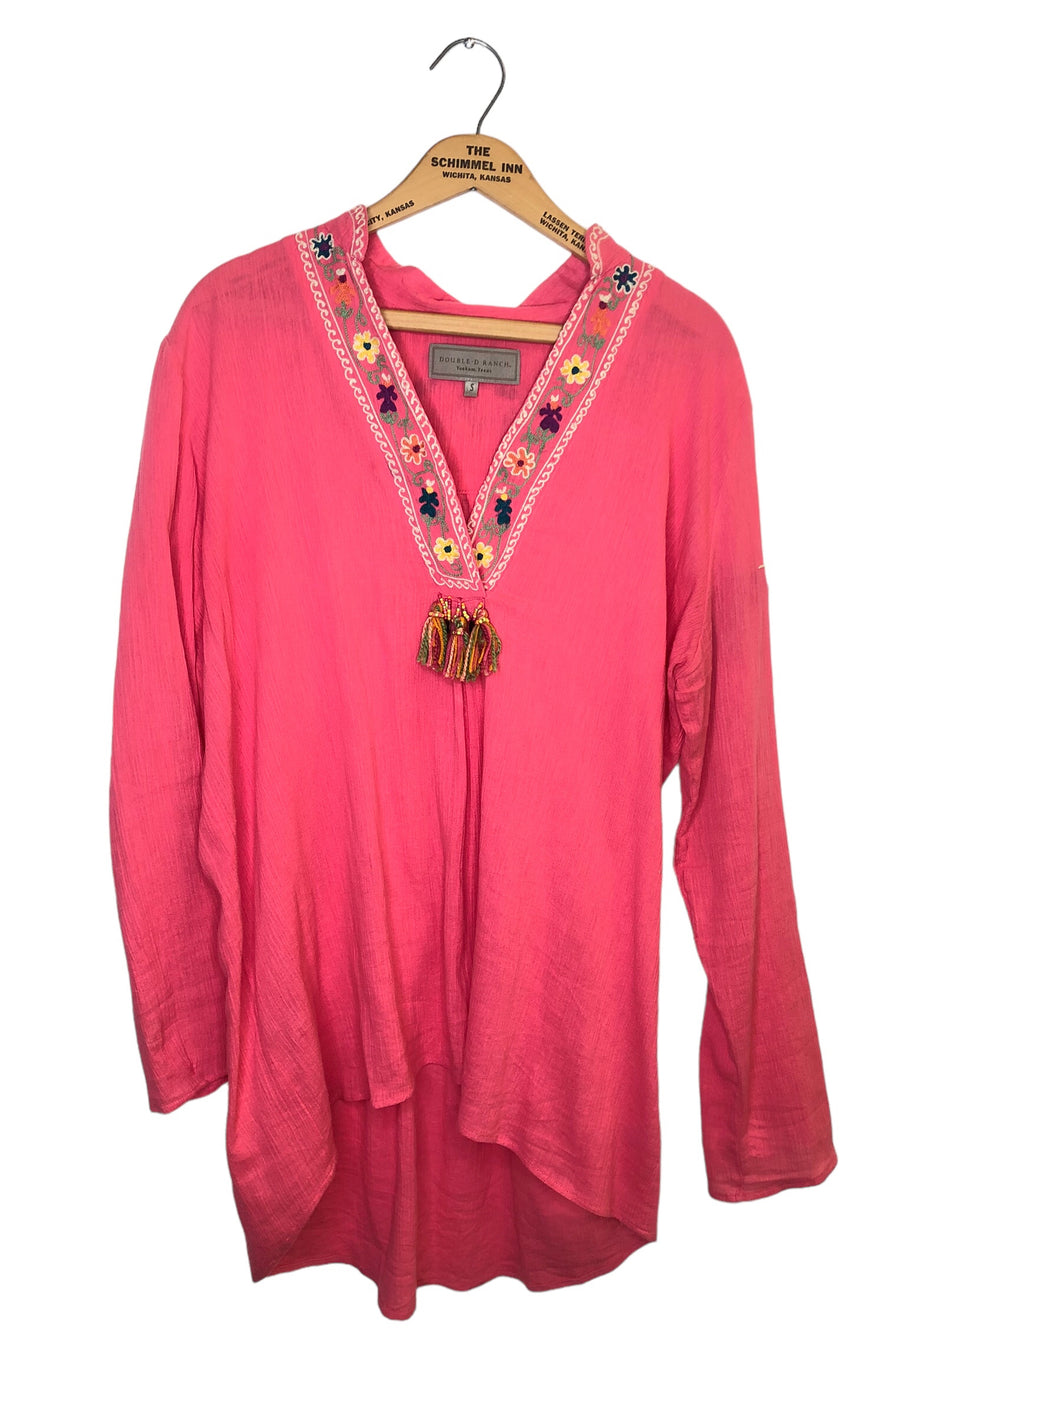 Size Small Pink Embroidered Blouse